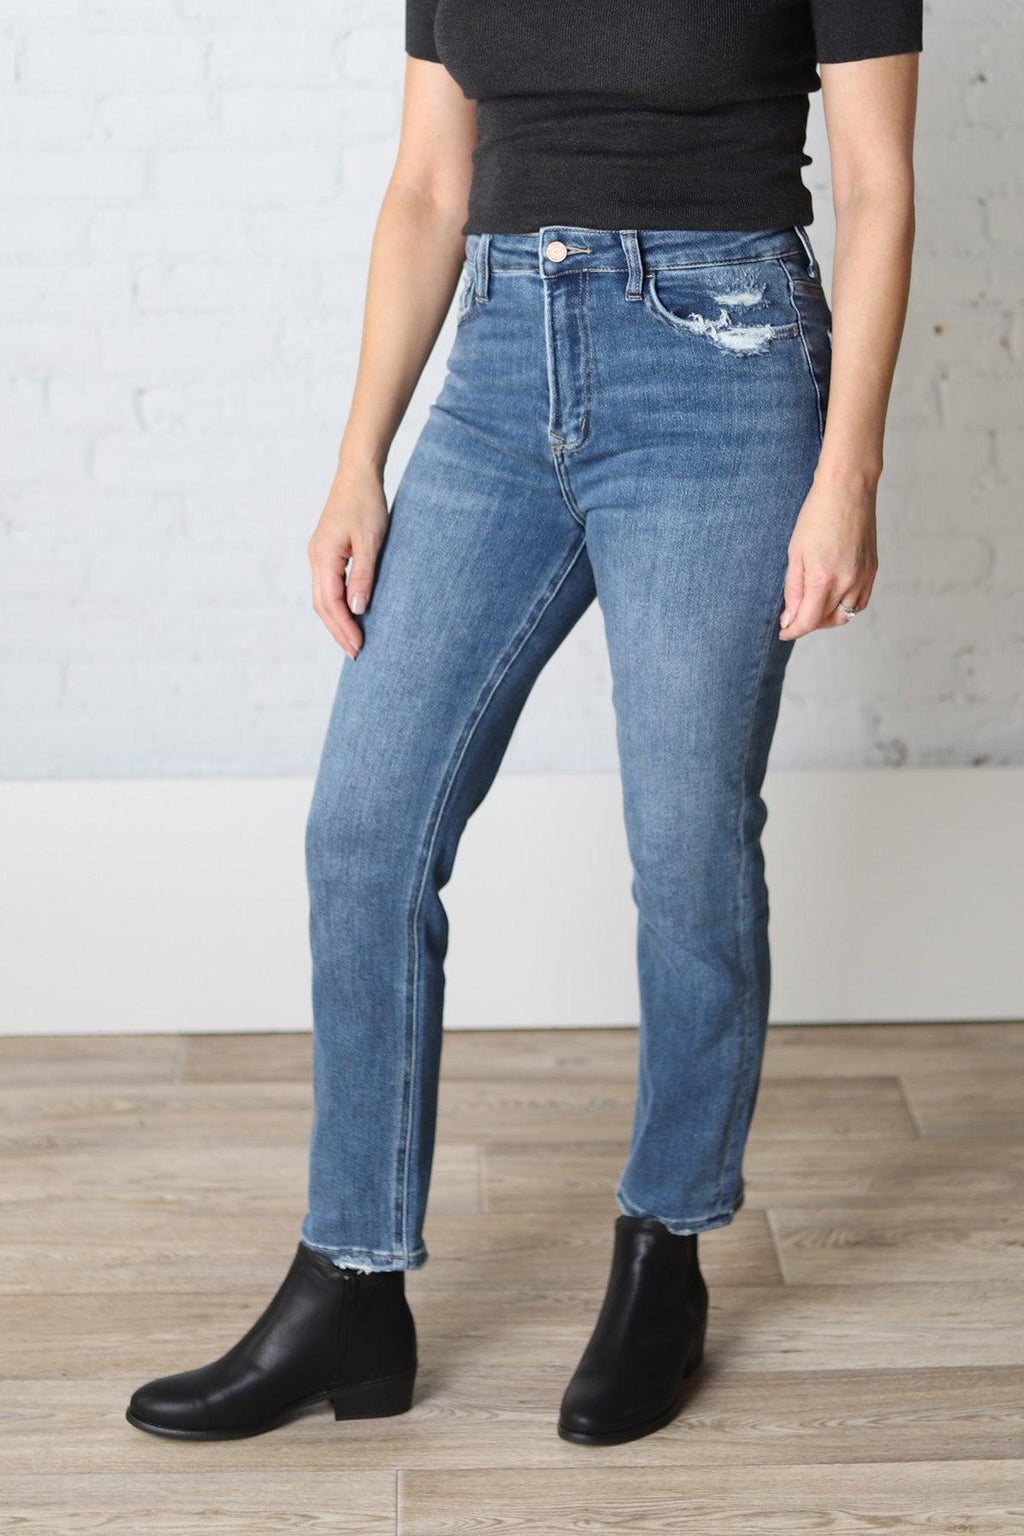 – 512 Gallery Jeans Boutique